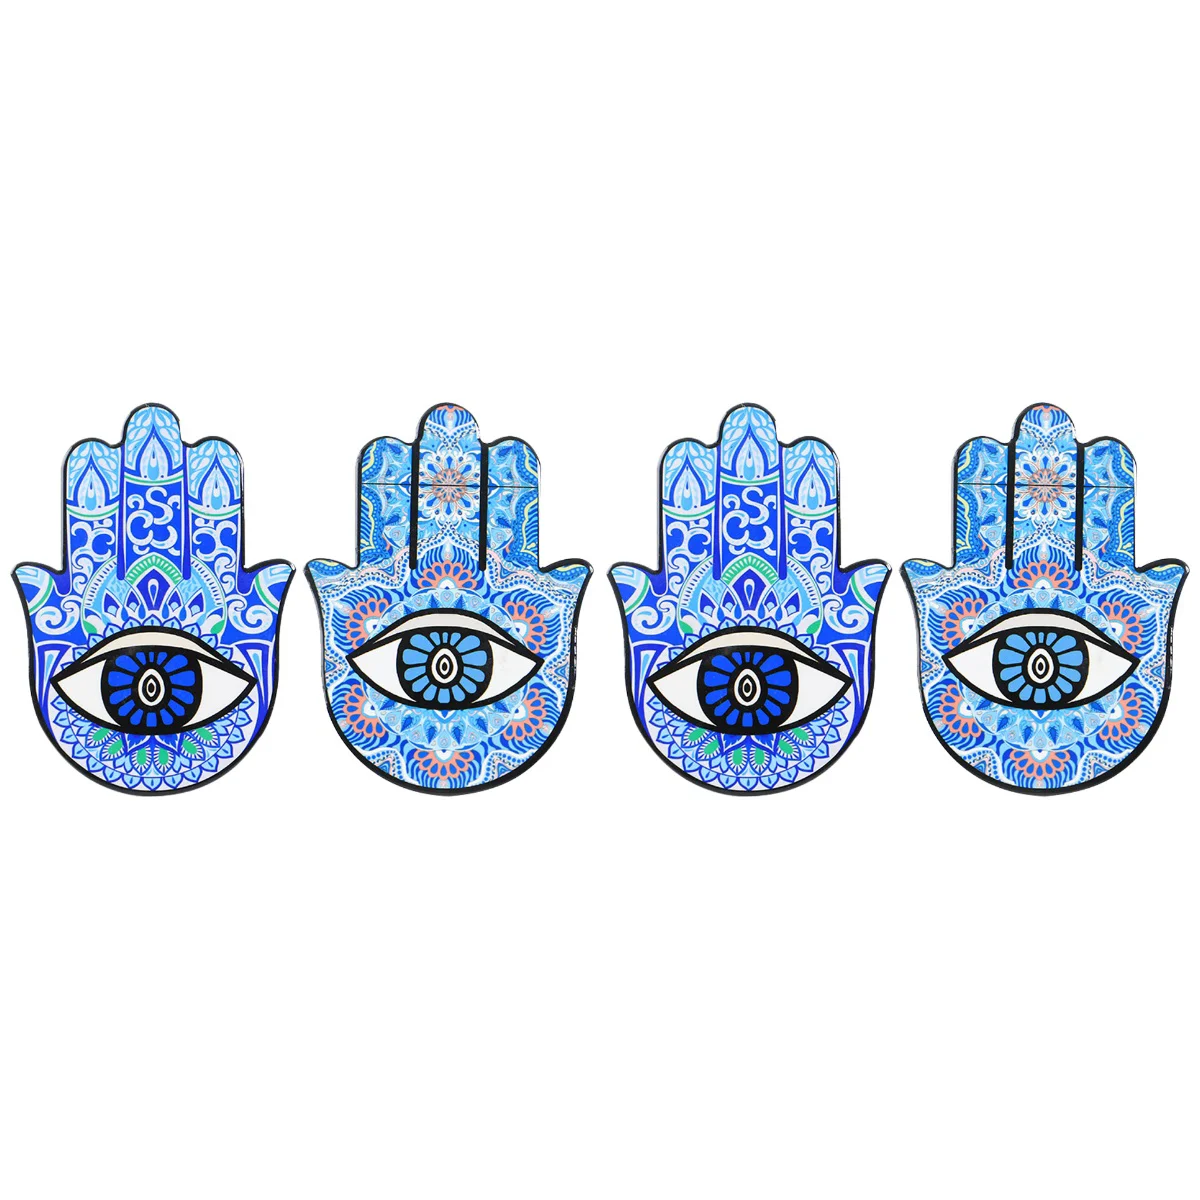 

Decor Hand Hamsa Eye Evil Amulet Table Home Fatima Ornament Protection Eclectic Hanging Lucky Sign Stand Wall Statue Charm Blue